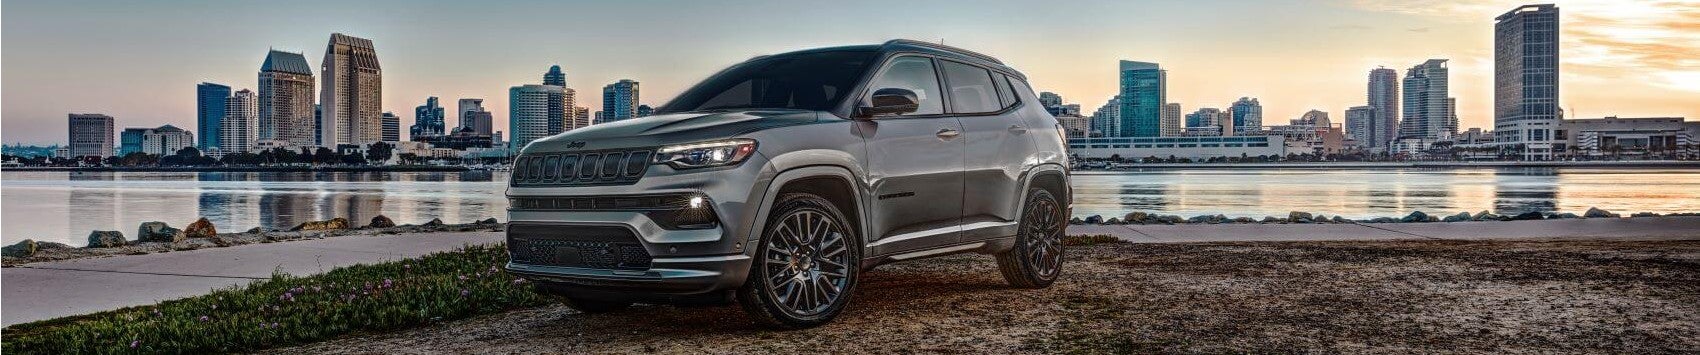 2022 Jeep Compass Outside of the City